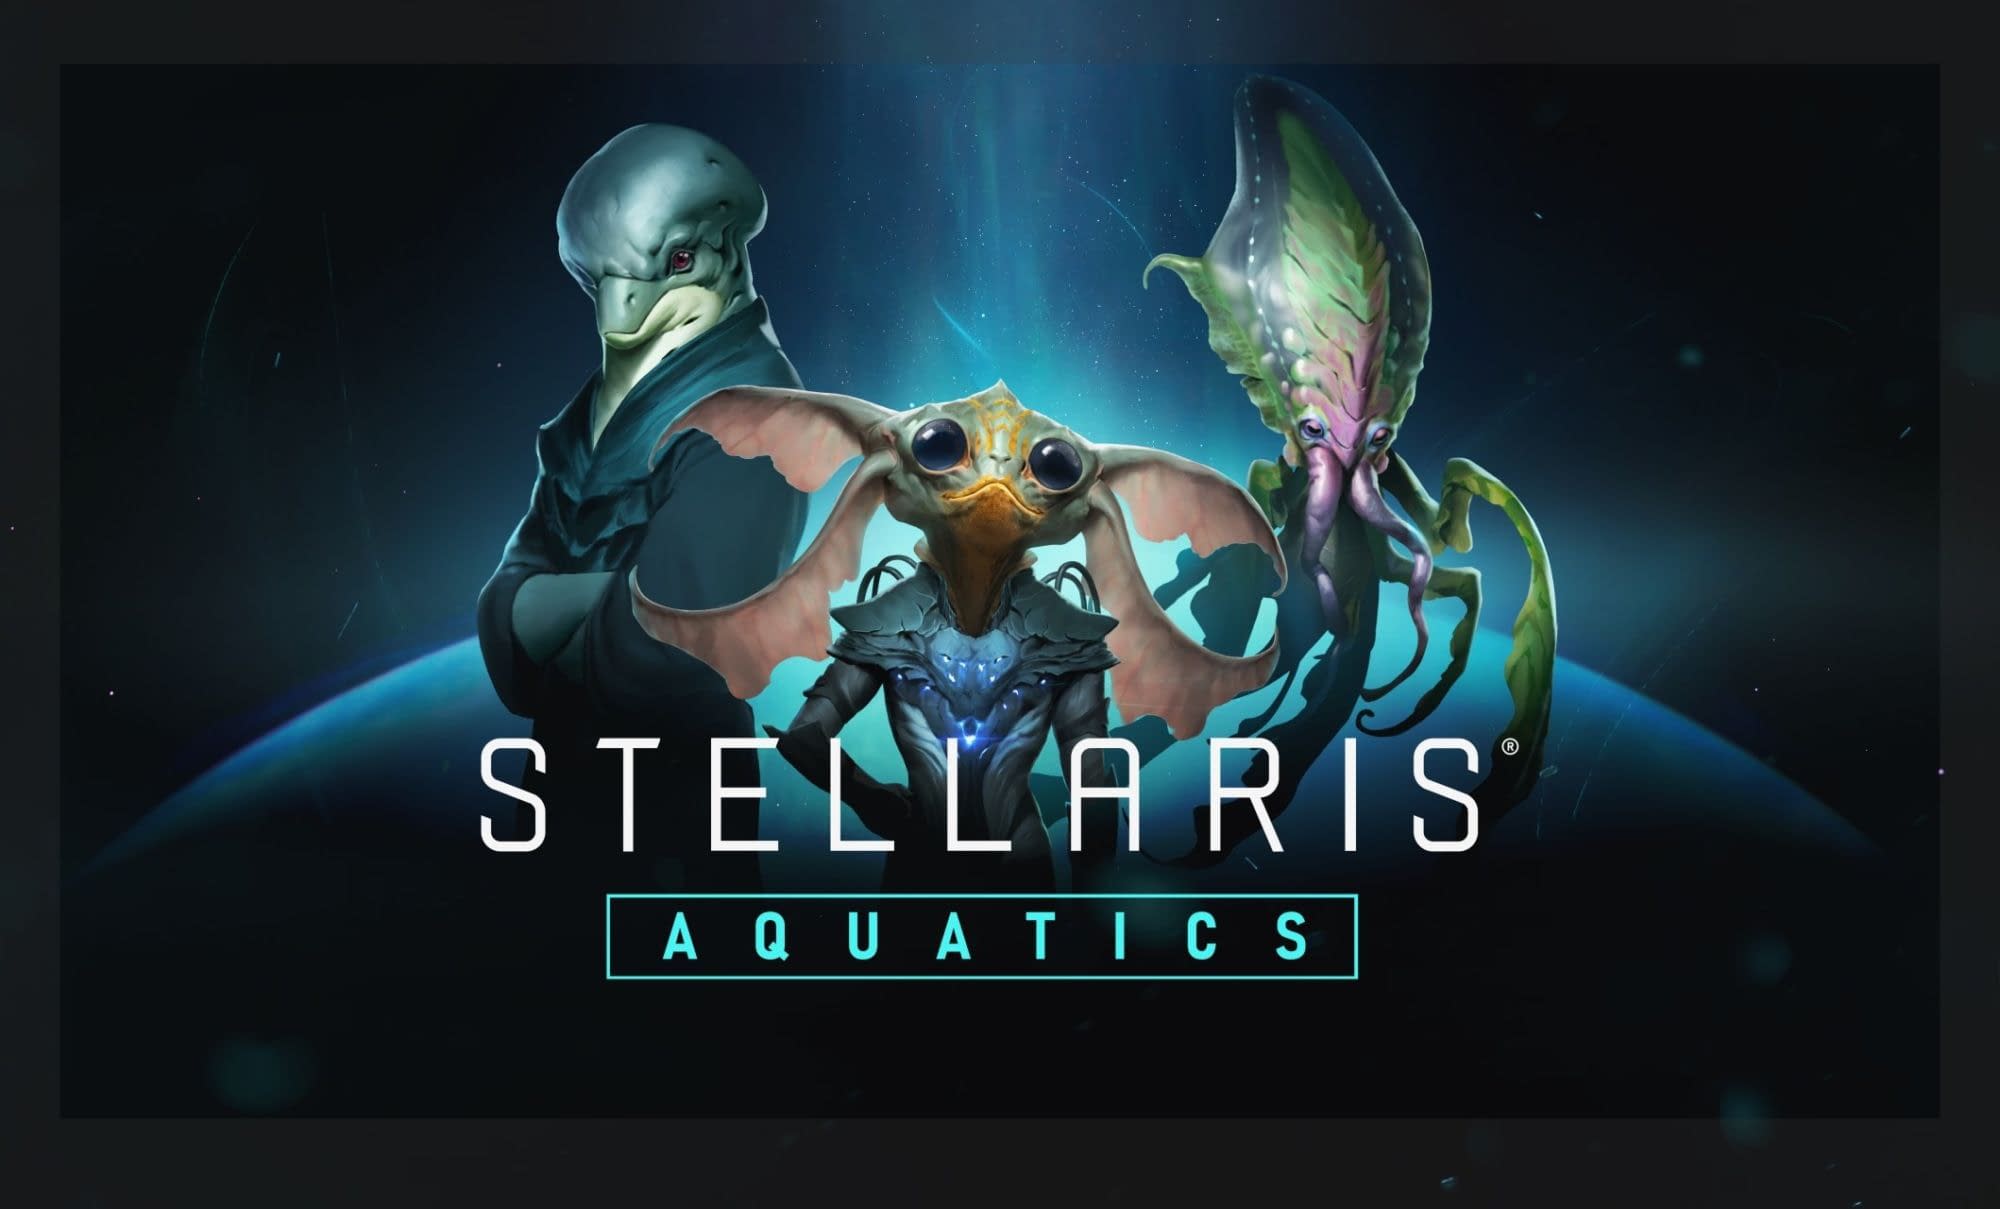 PC version of Stellaris got an add-on and free update